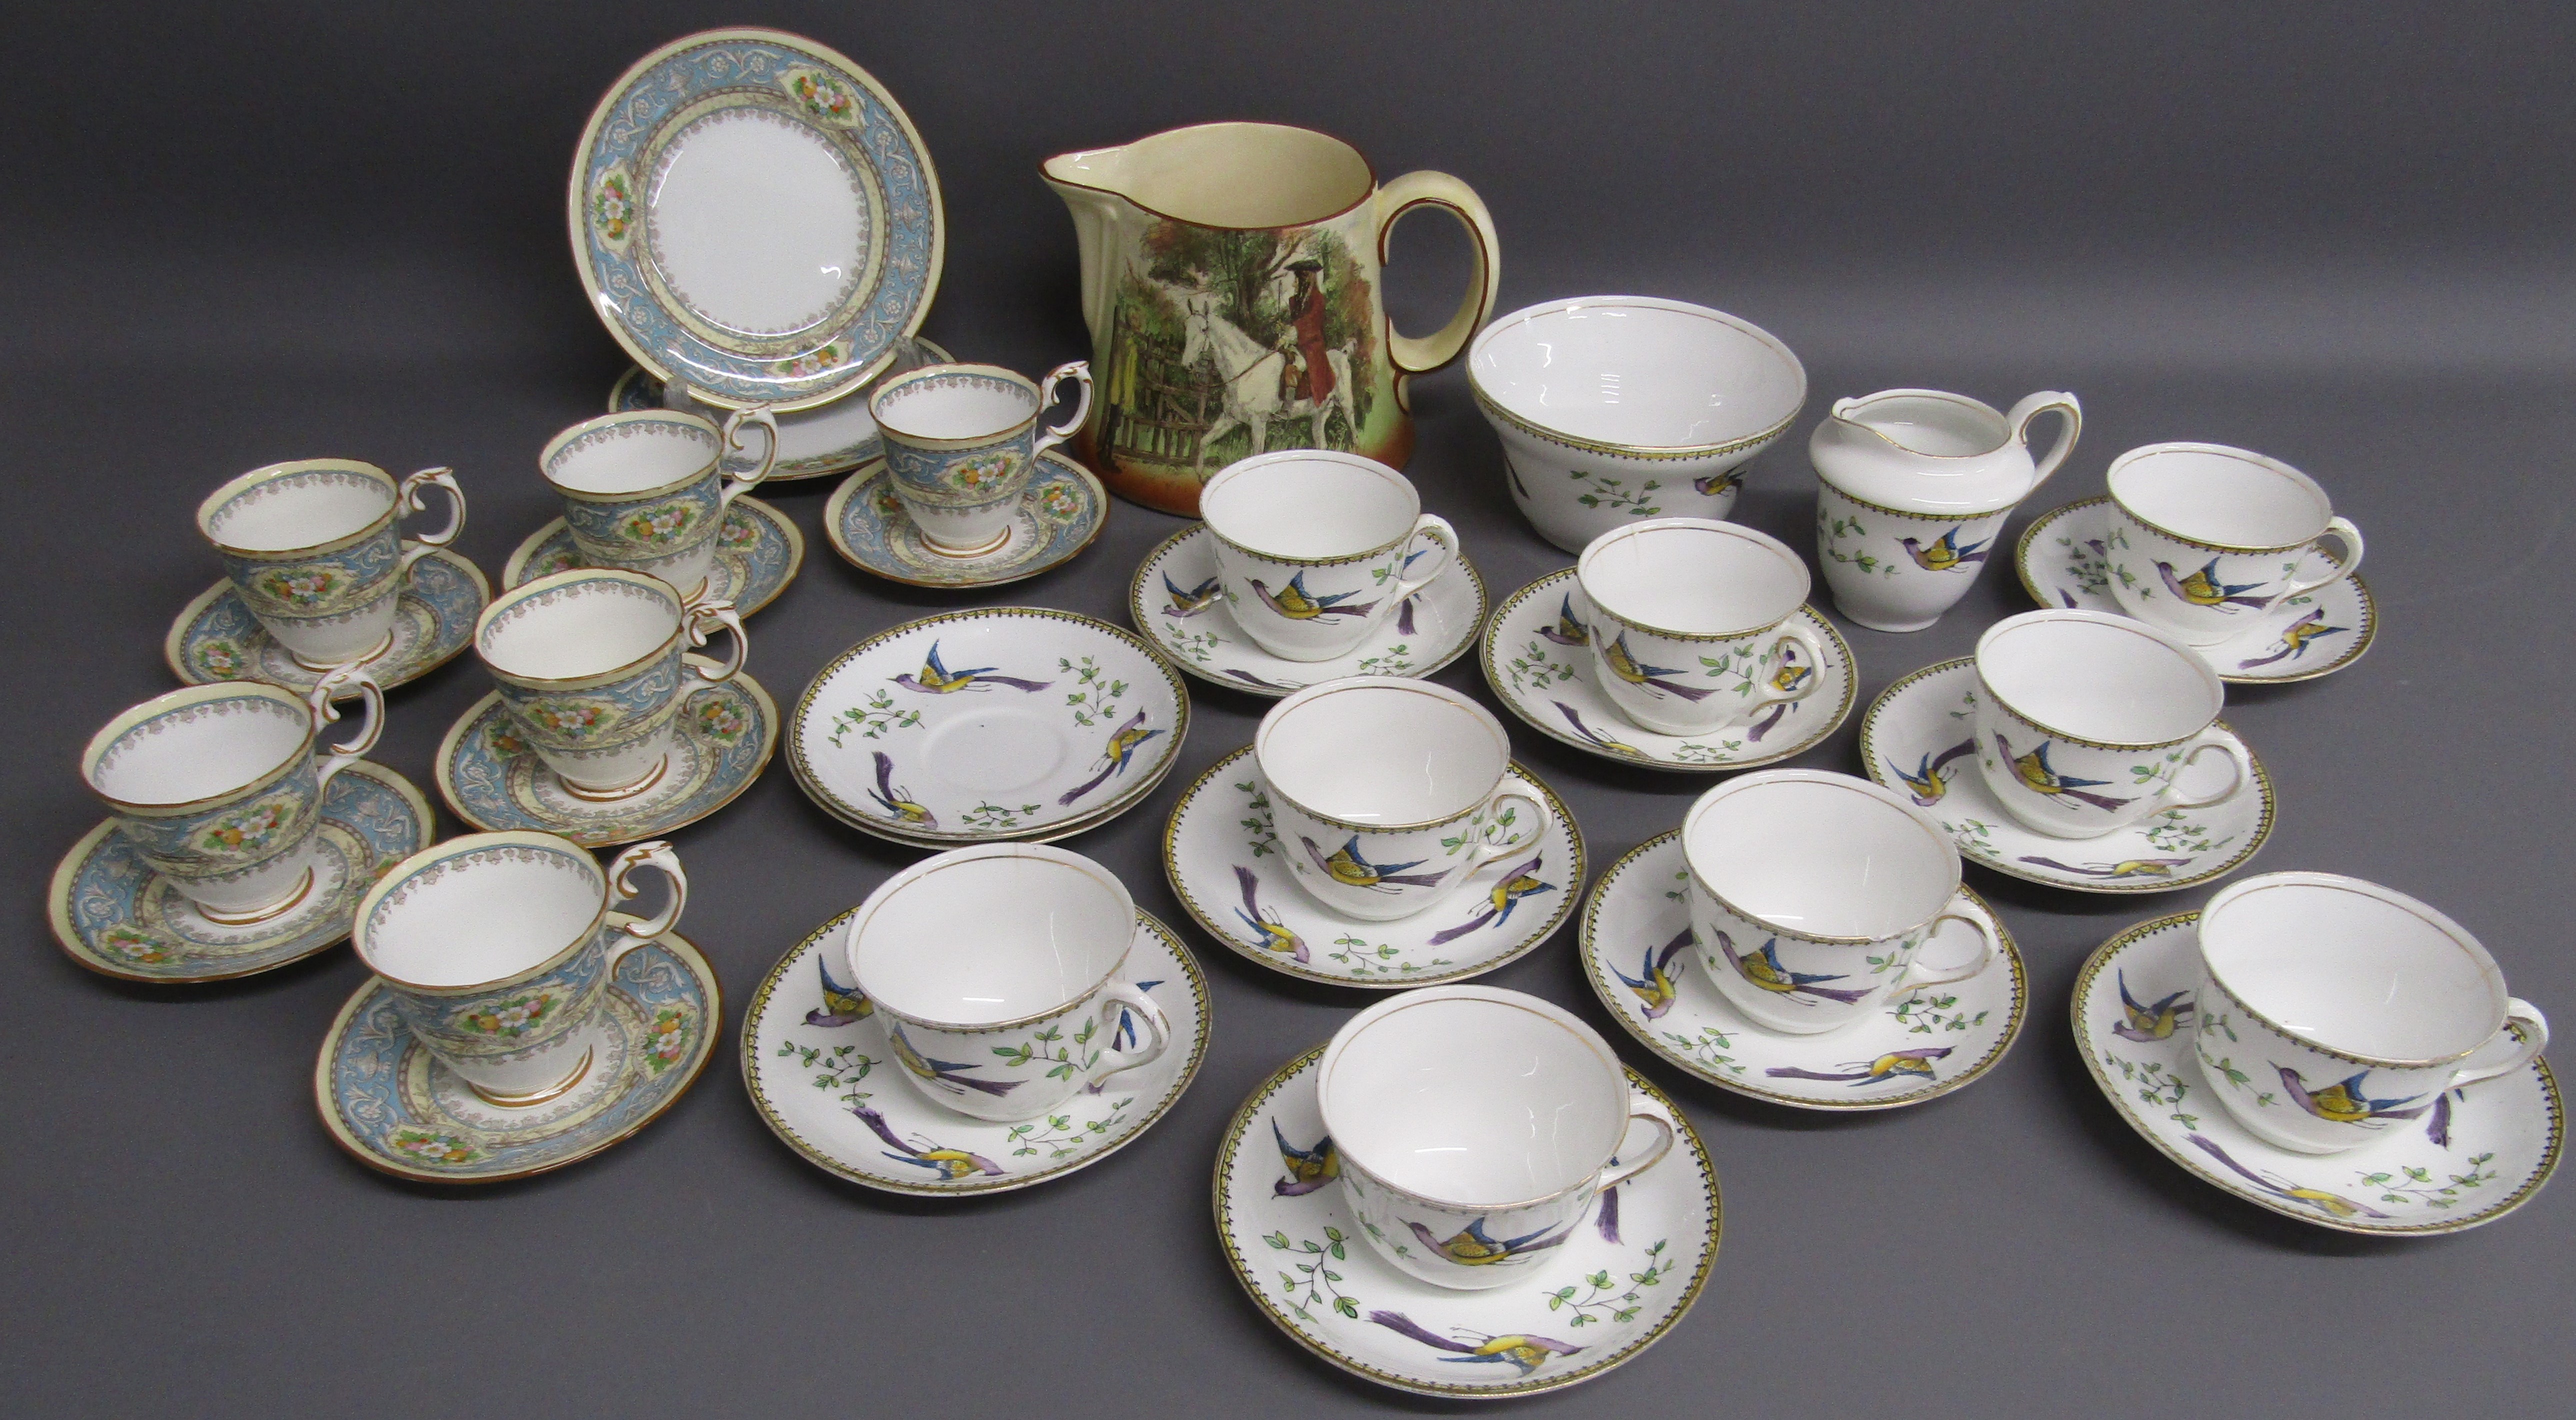 Royal Doulton Sir Roger de Coverley jug, Crown Staffordshire 15646 teacups and saucers along with